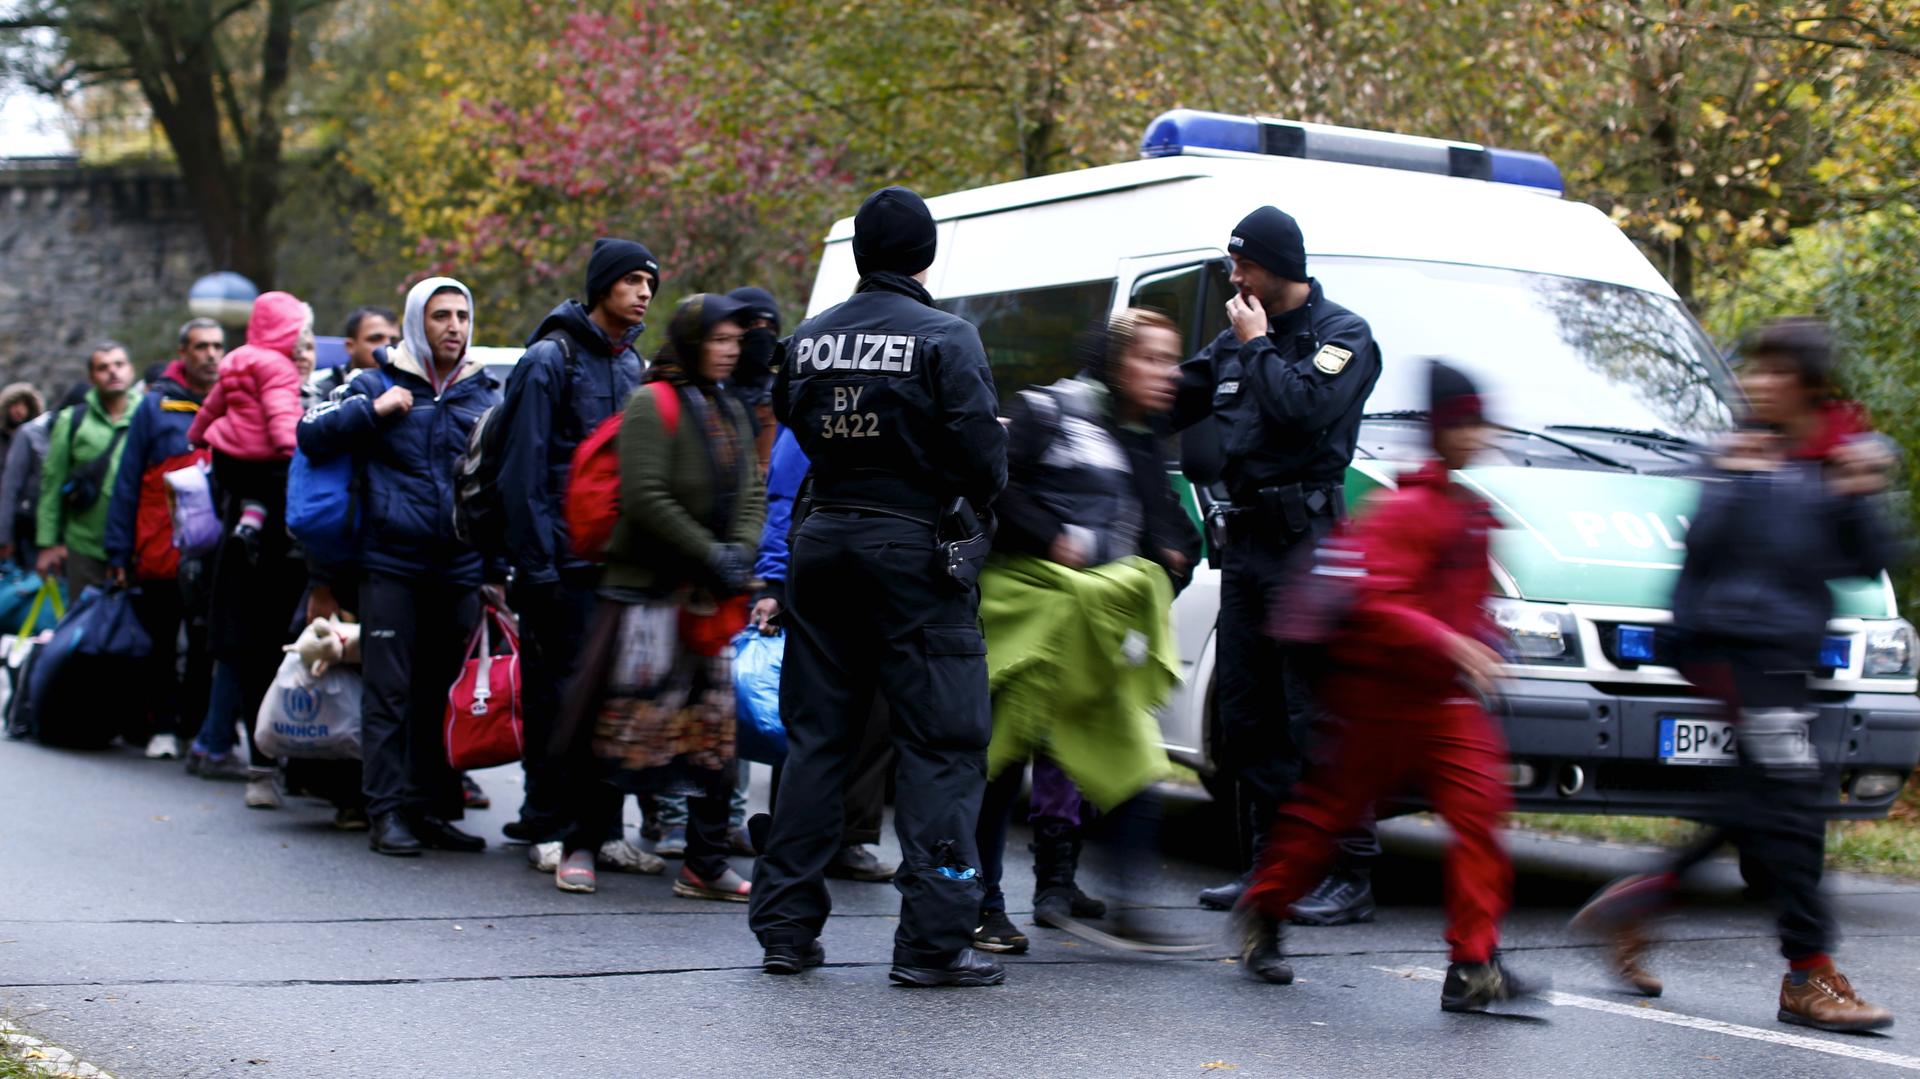 Newly arrived migrants are cleared by German police officers after crossing the Austrian-German border from Achleiten, Austria, into the city of Passau, Germany on October 29, 2015. 